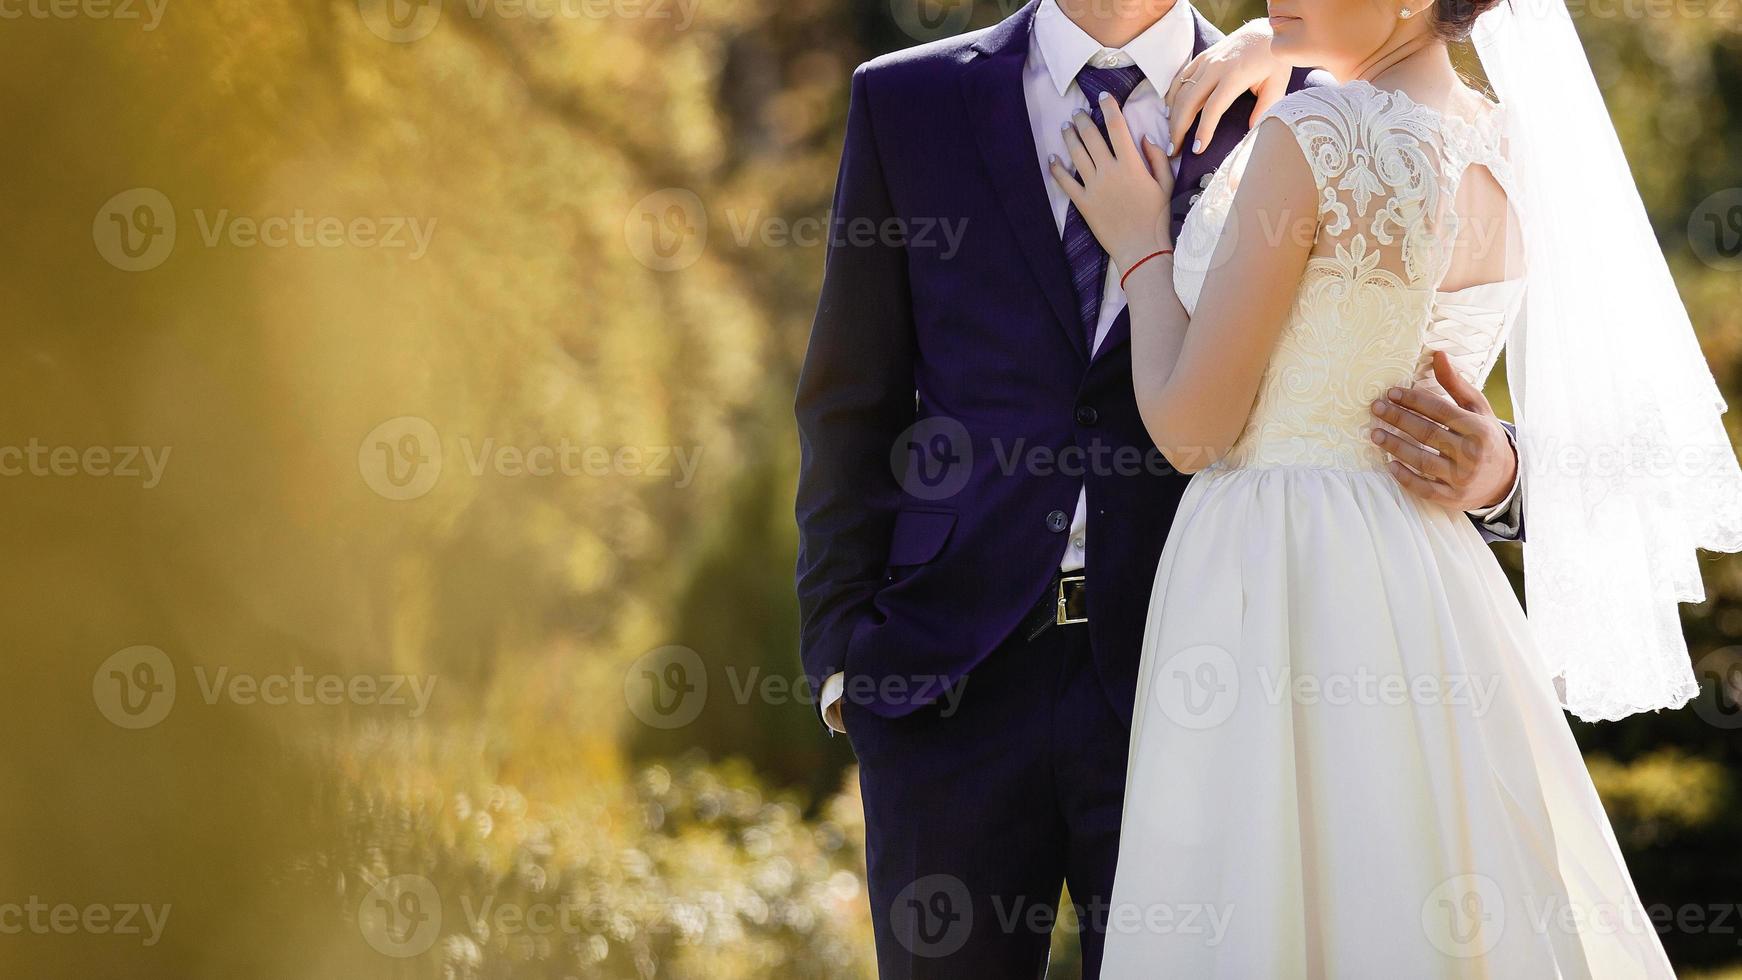 Sunshine portrait of happy bride and groom outdoor in nature location at sunset warm summertime photo